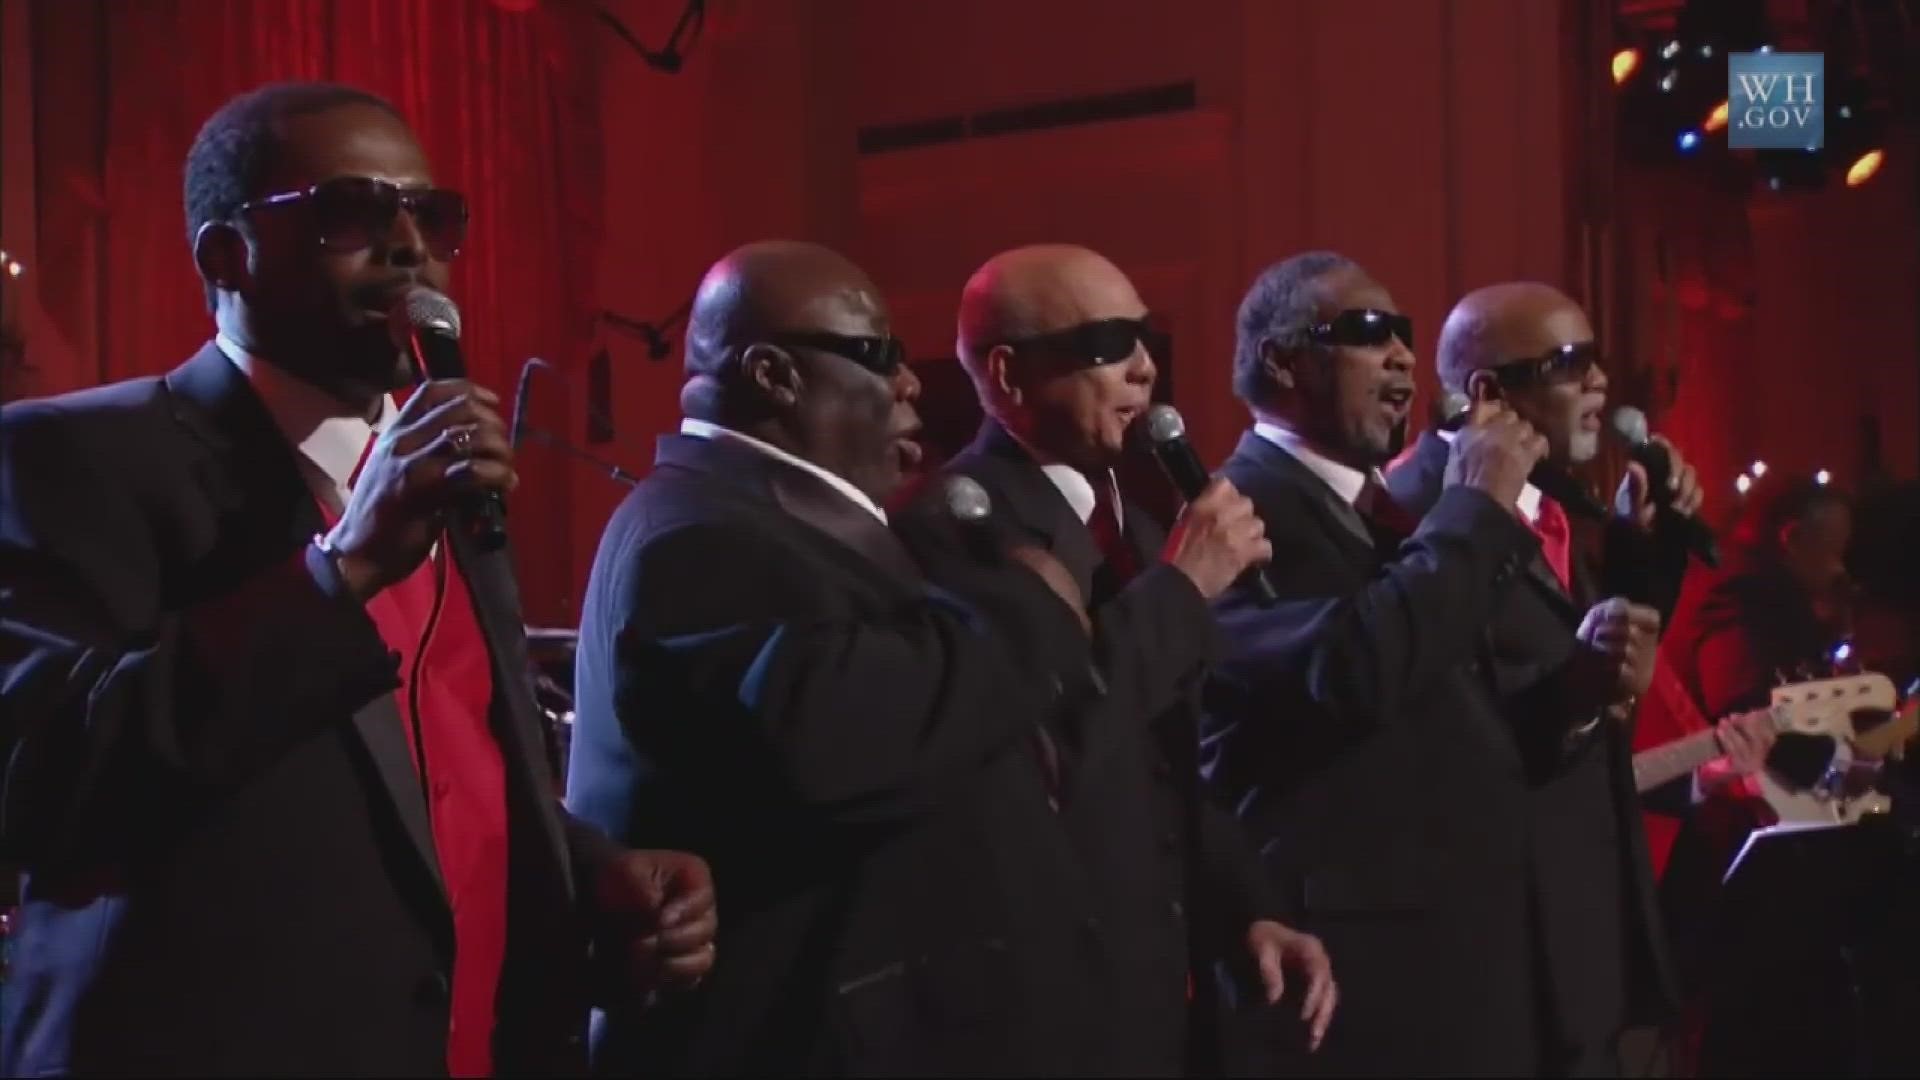 The Blind Boys of Alabama will play a show in Beaverton on Jan. 25 before attending the Grammy Awards. KGW's Brenda Braxton spoke with drummer Ricky McKinnie.